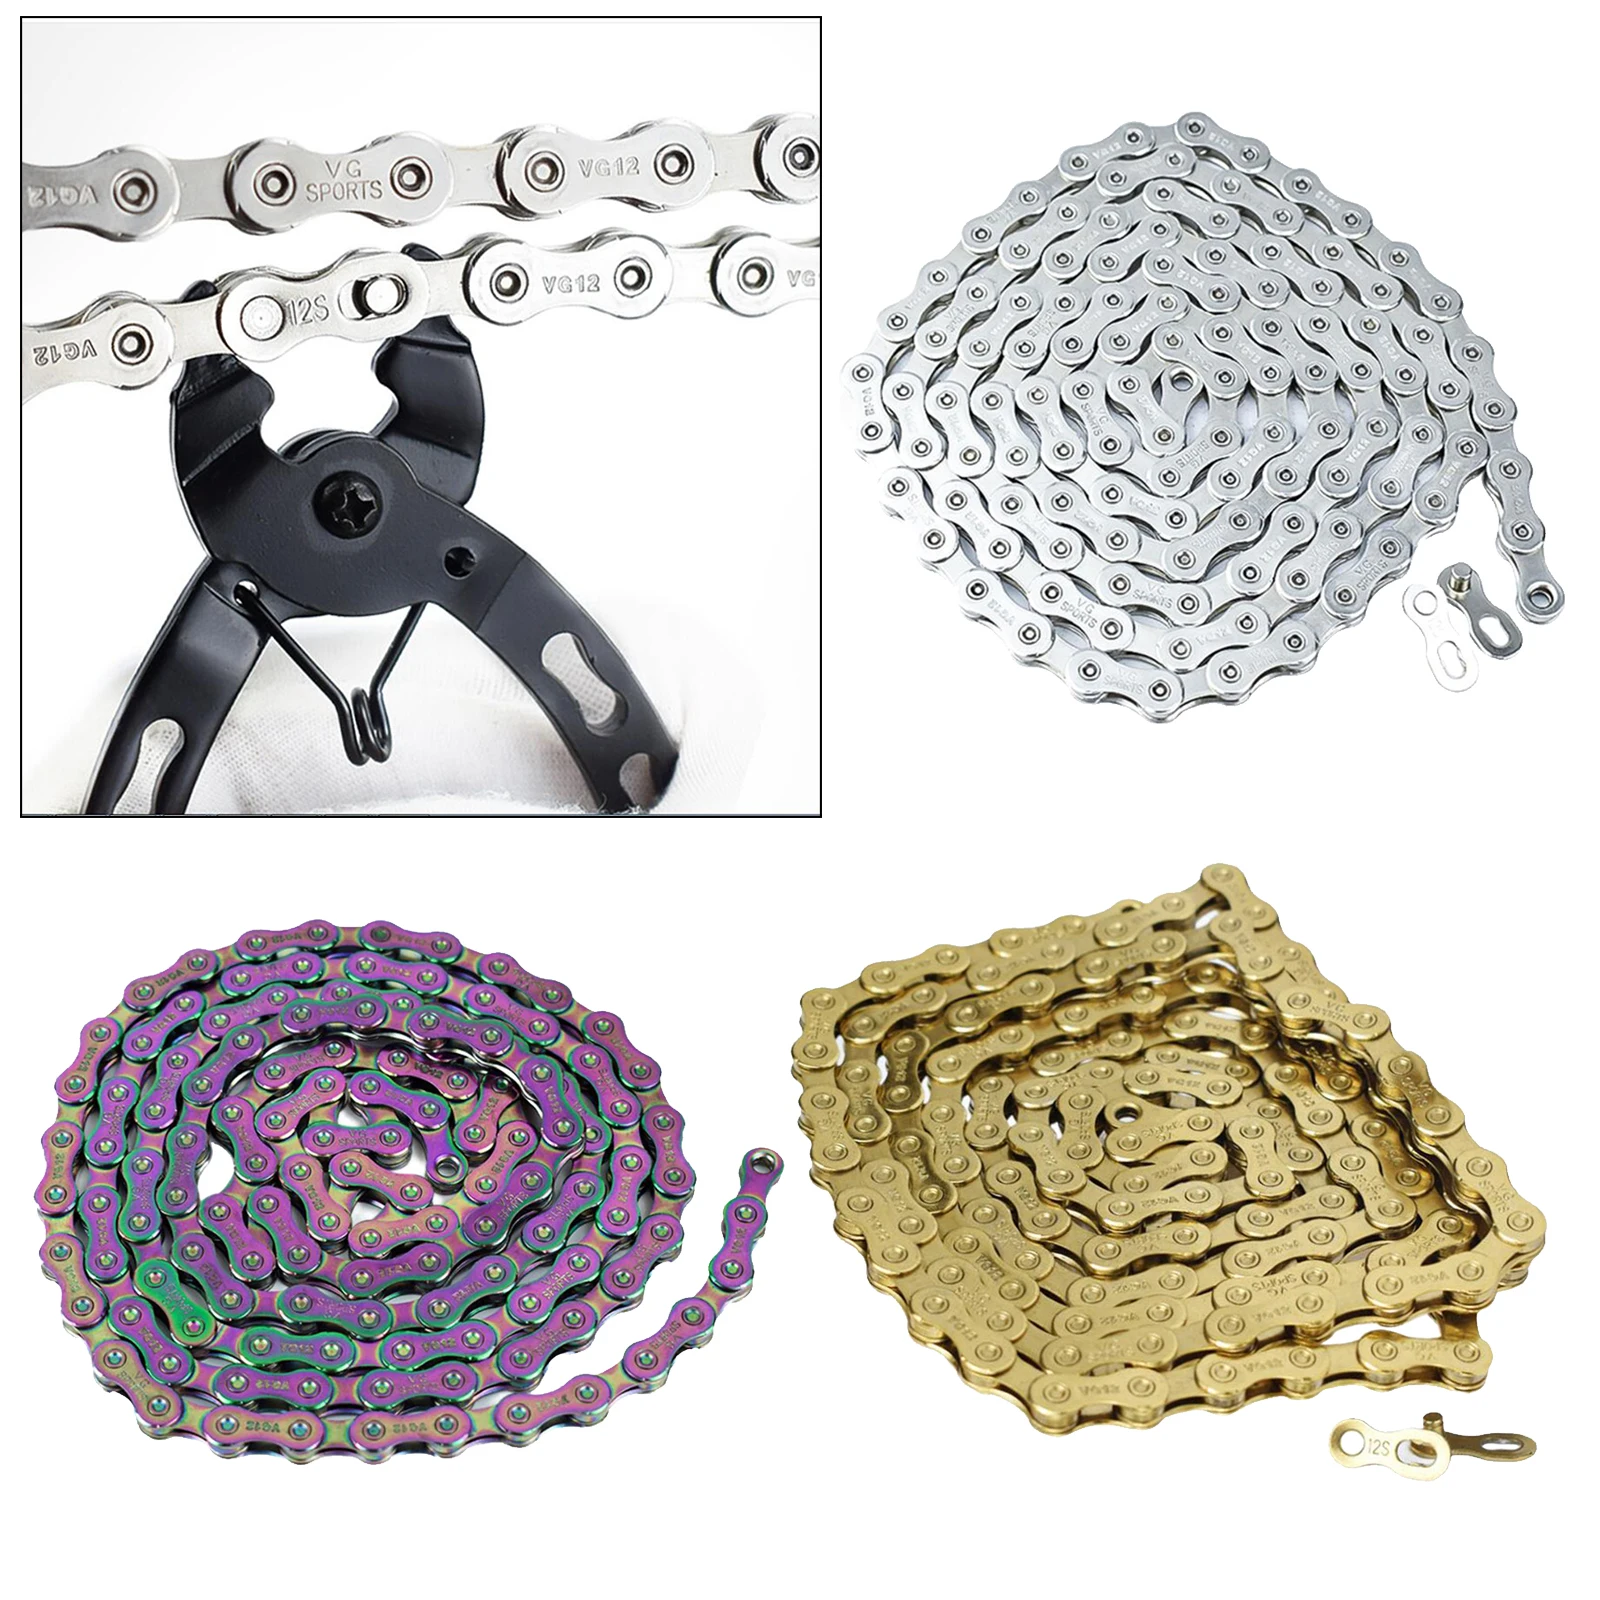 126 Links Bike Chain 12 Speed Mountain Road Bicycle Chain Link Chains FitsDrivetrain System Chains Parts Accessories